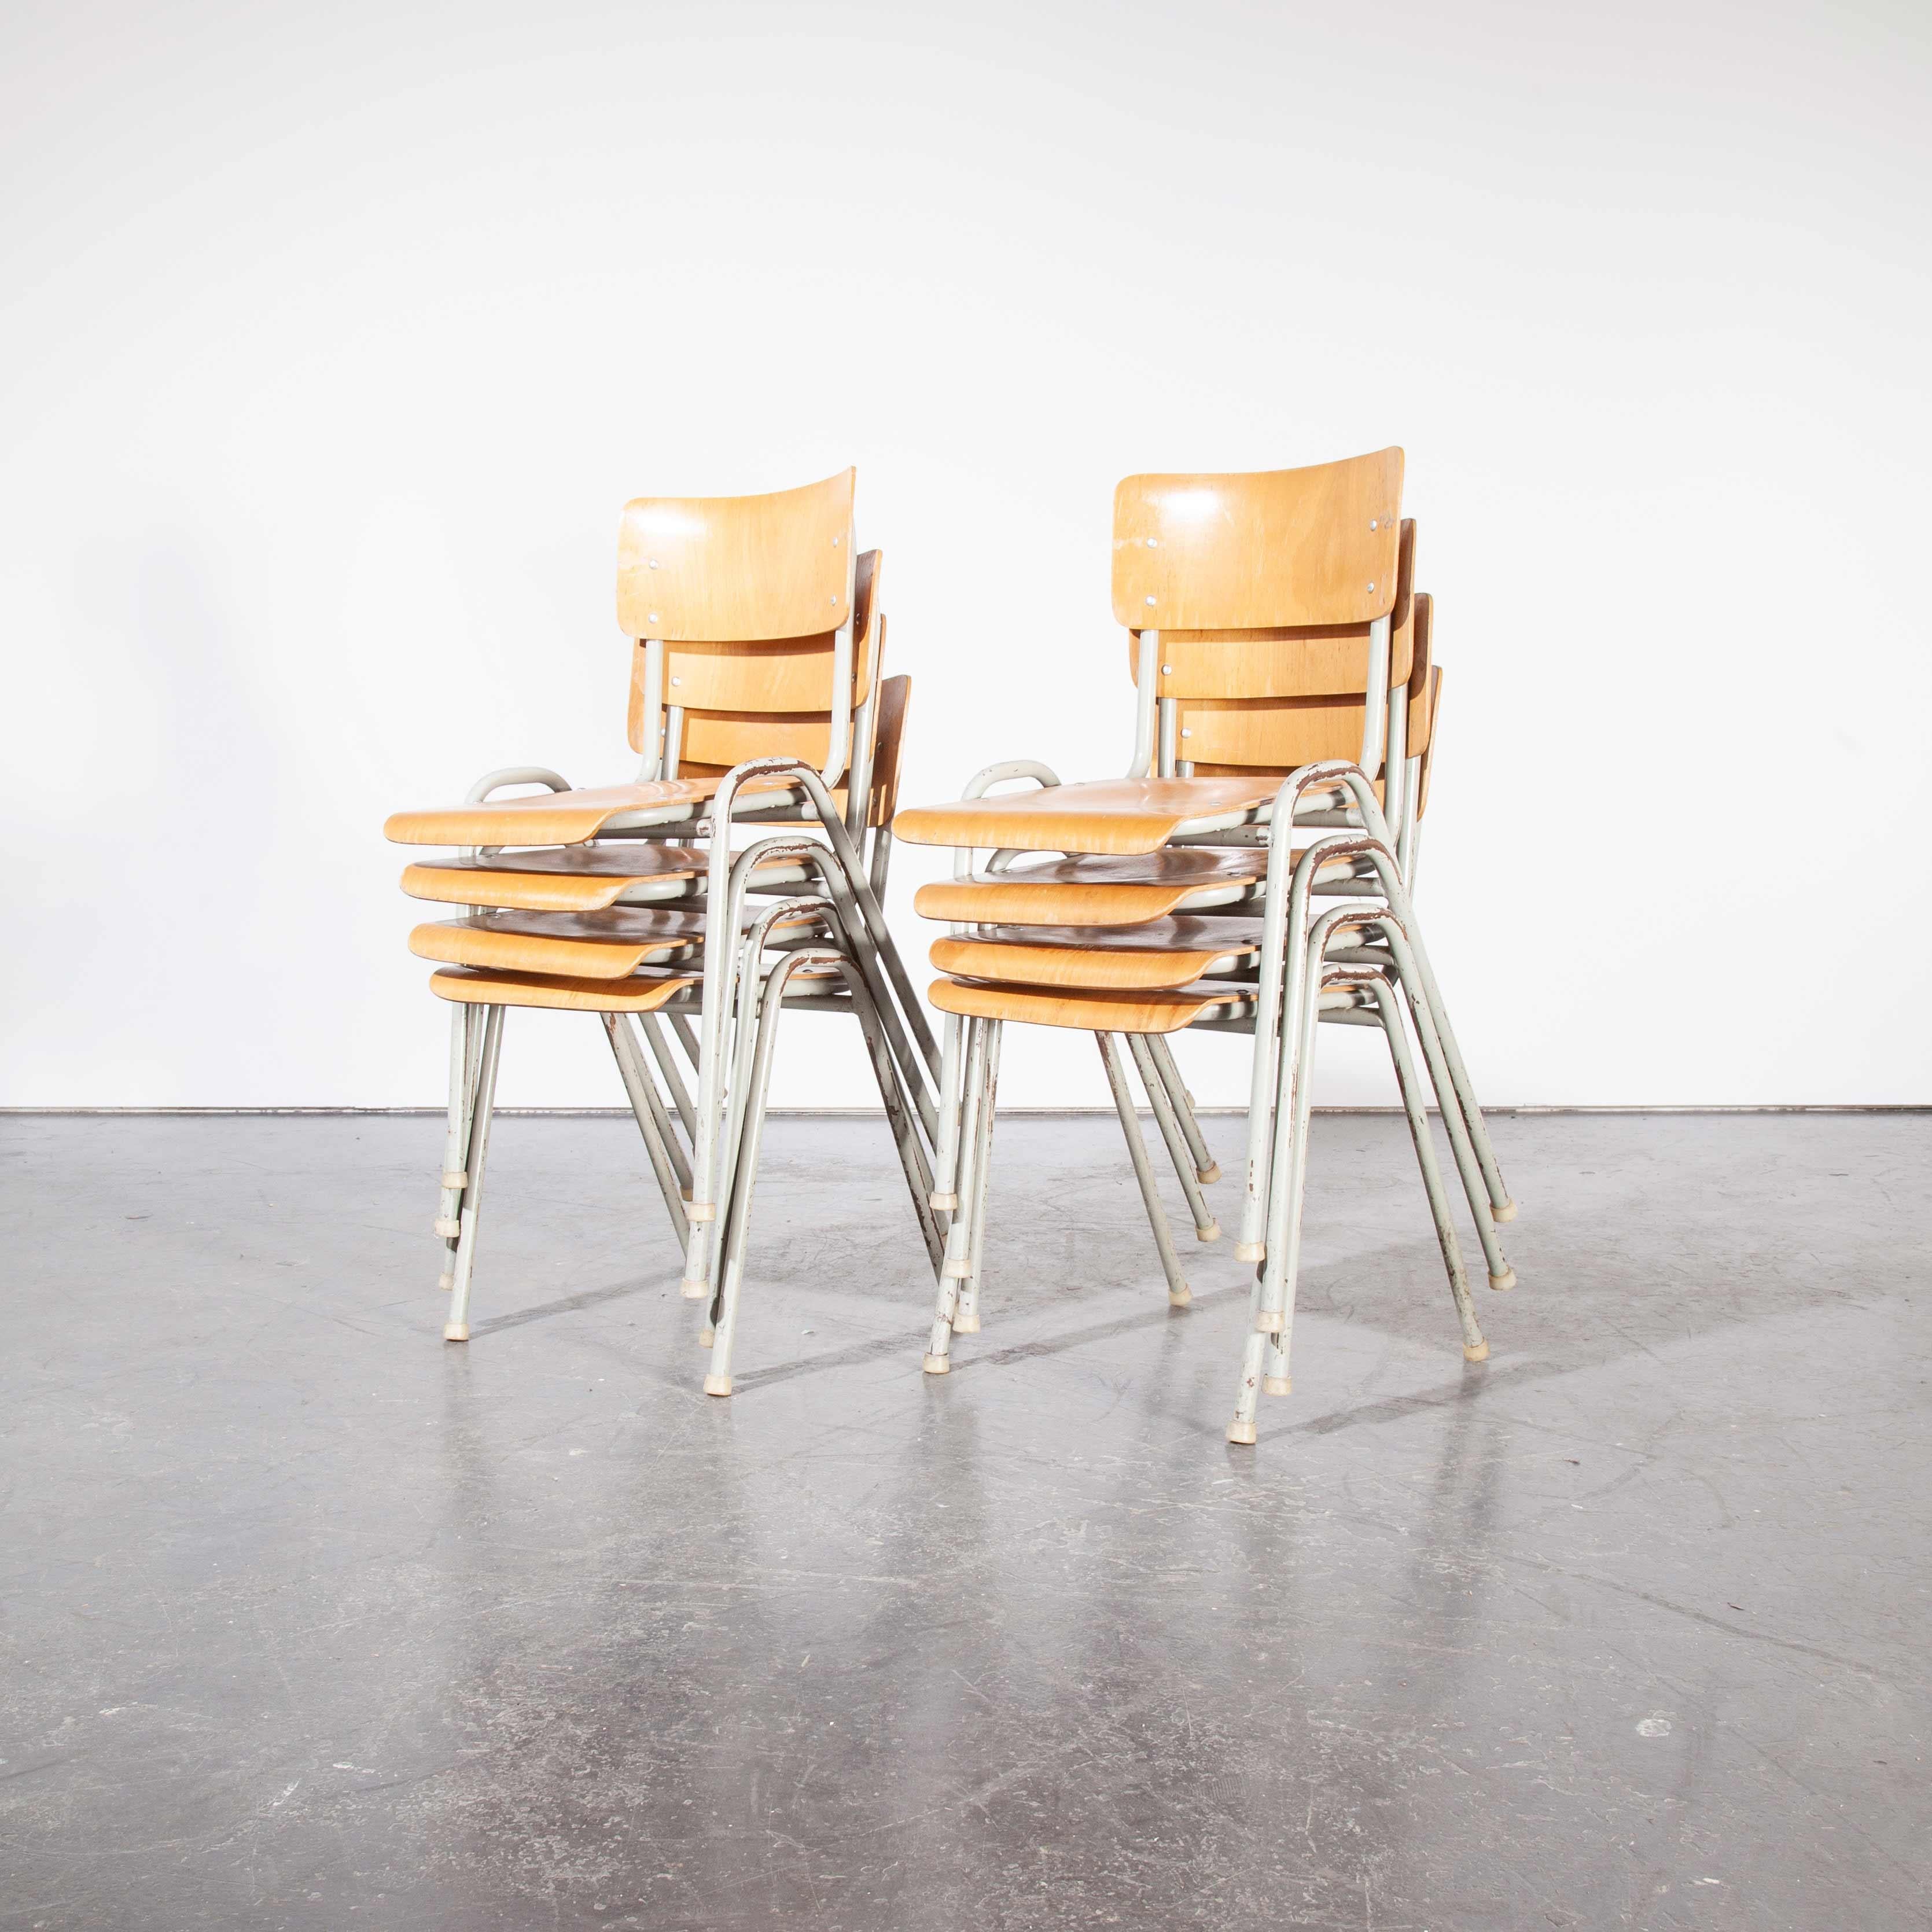 1960s French metal framed stacking University – Dining chairs – Set of eight

1960s French metal framed stacking university – dining chairs – set of eight. We sourced these great chairs from a campus in southern France. Great robust stacking